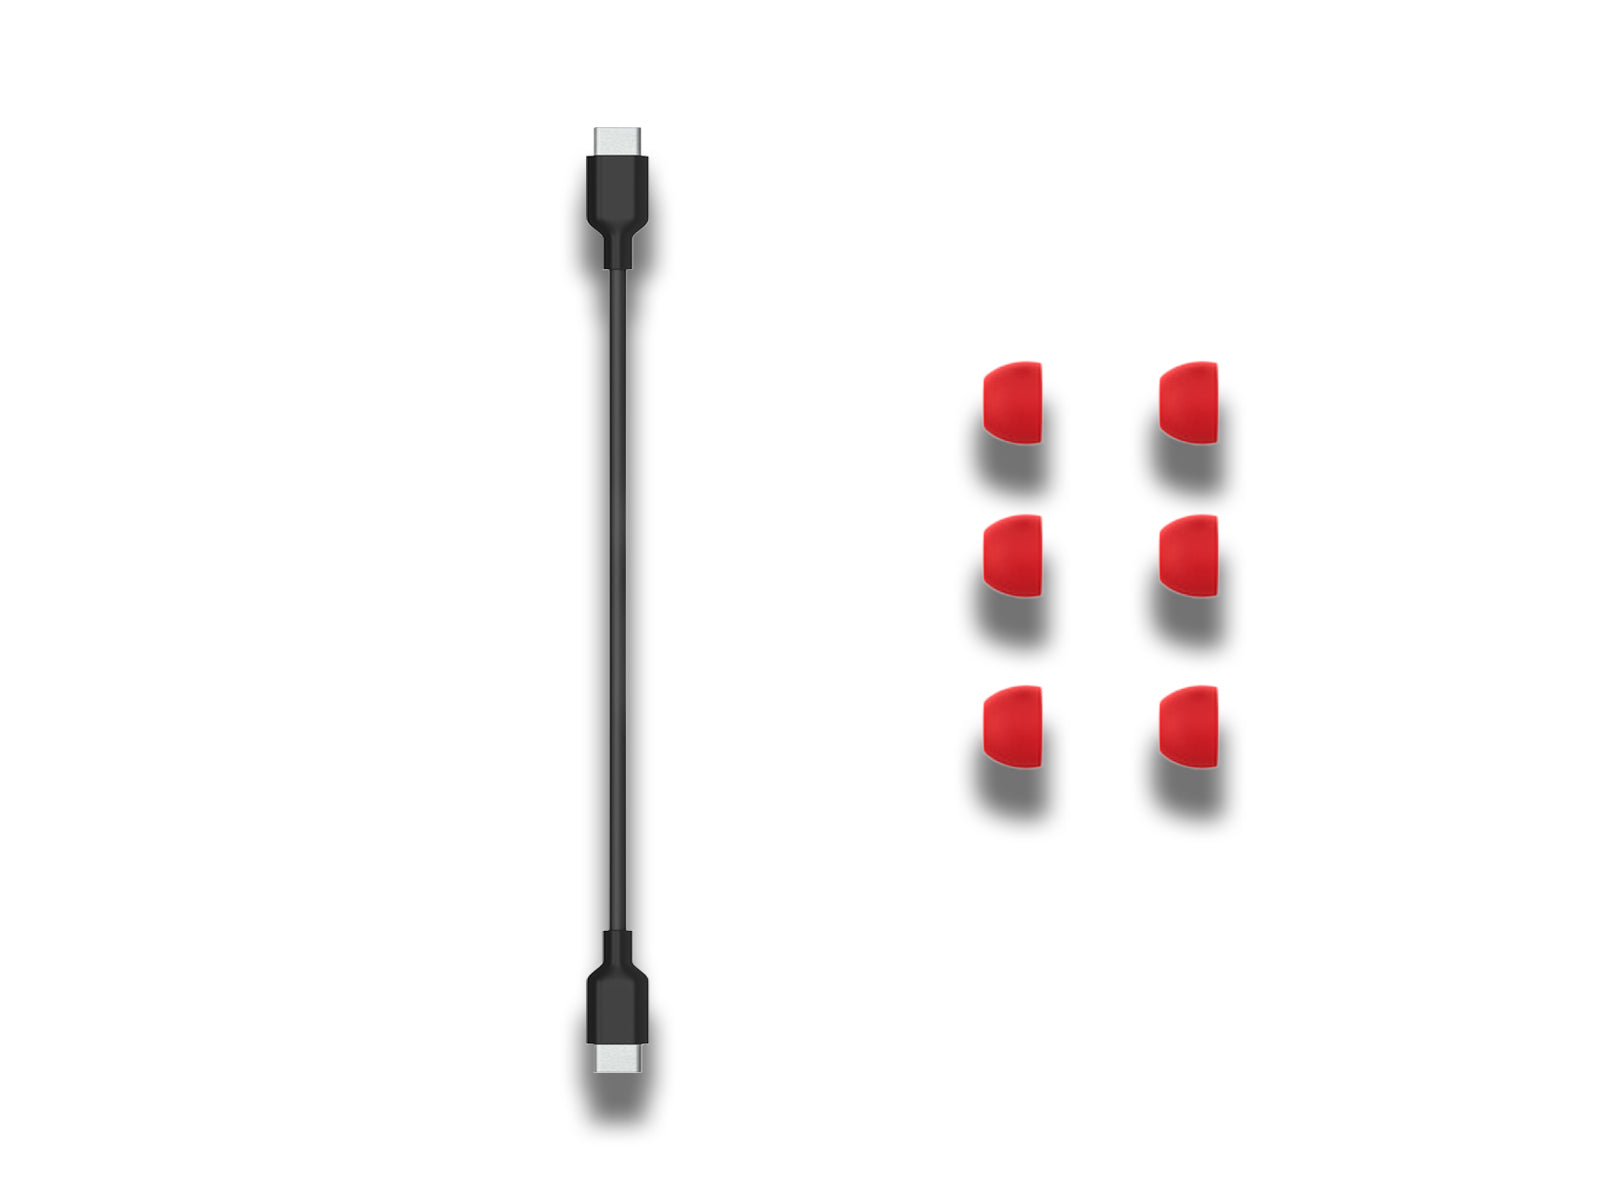 Image-of-the-usb-c-to-usb-c-cable-and-6-ear-plugs-on-the-white-background